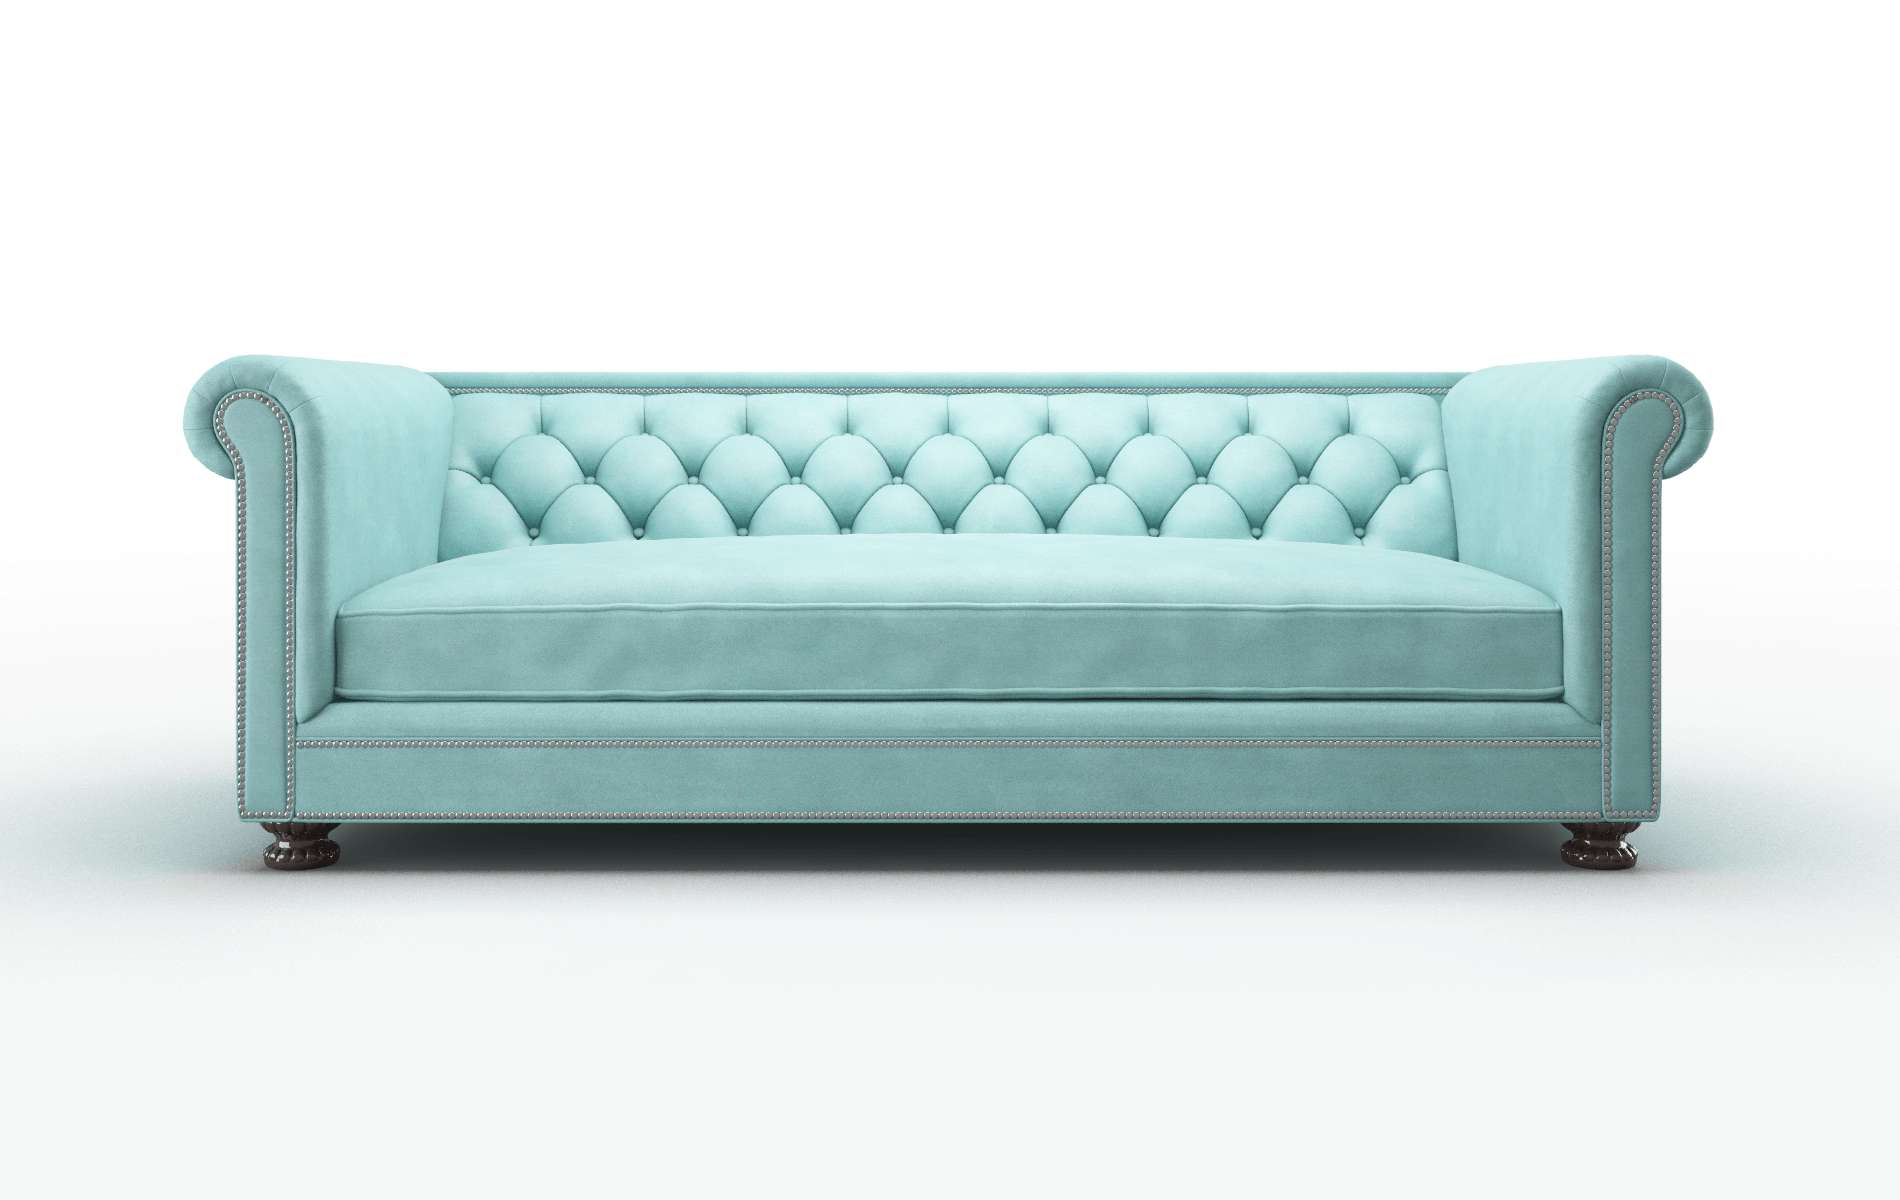 Athens Curious Turquoise chair espresso legs